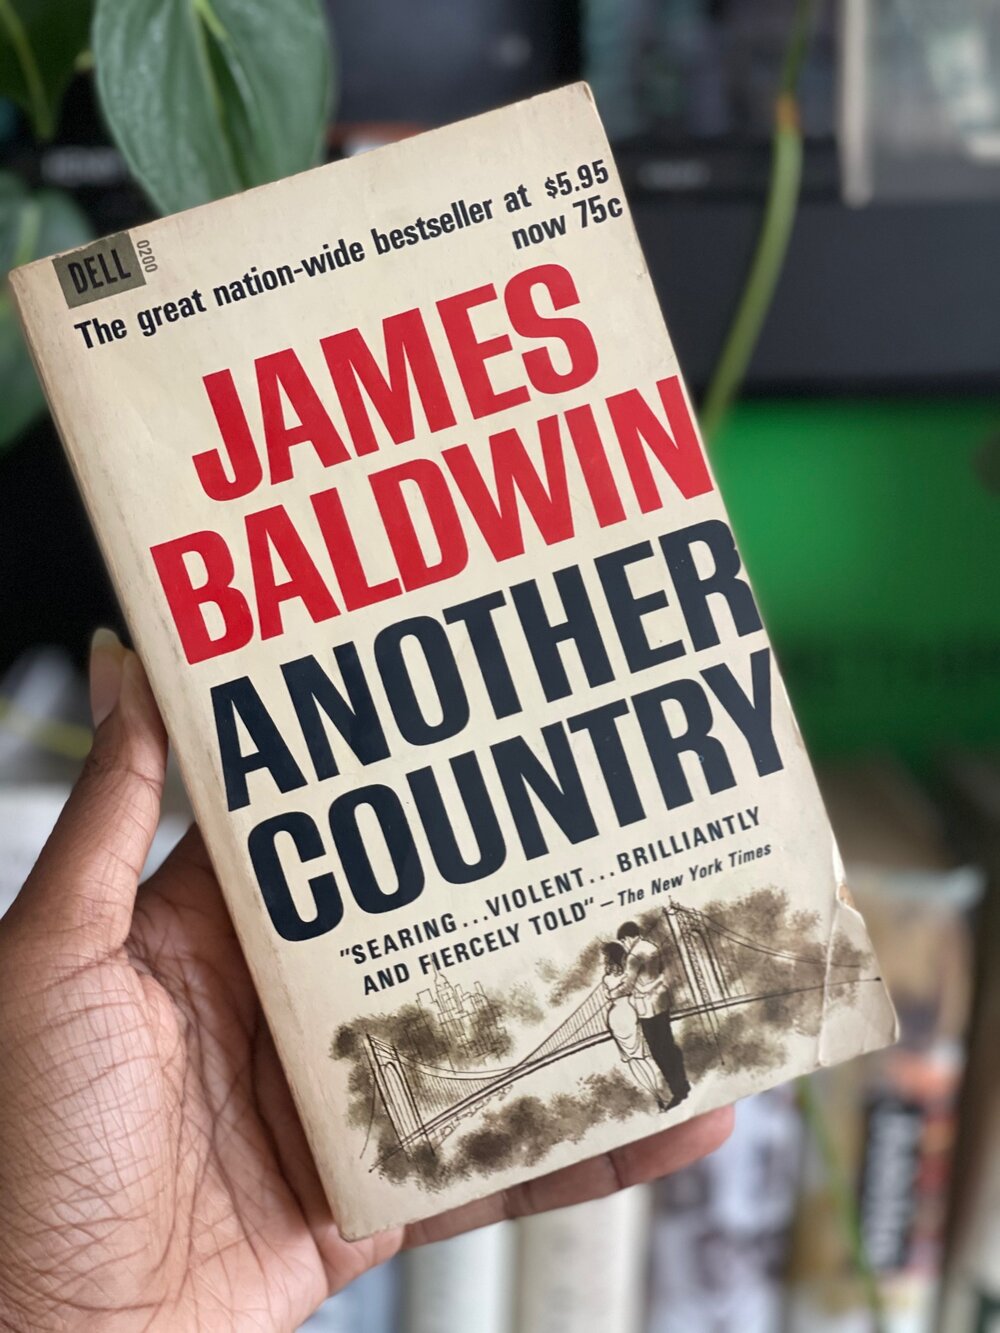 another country baldwin